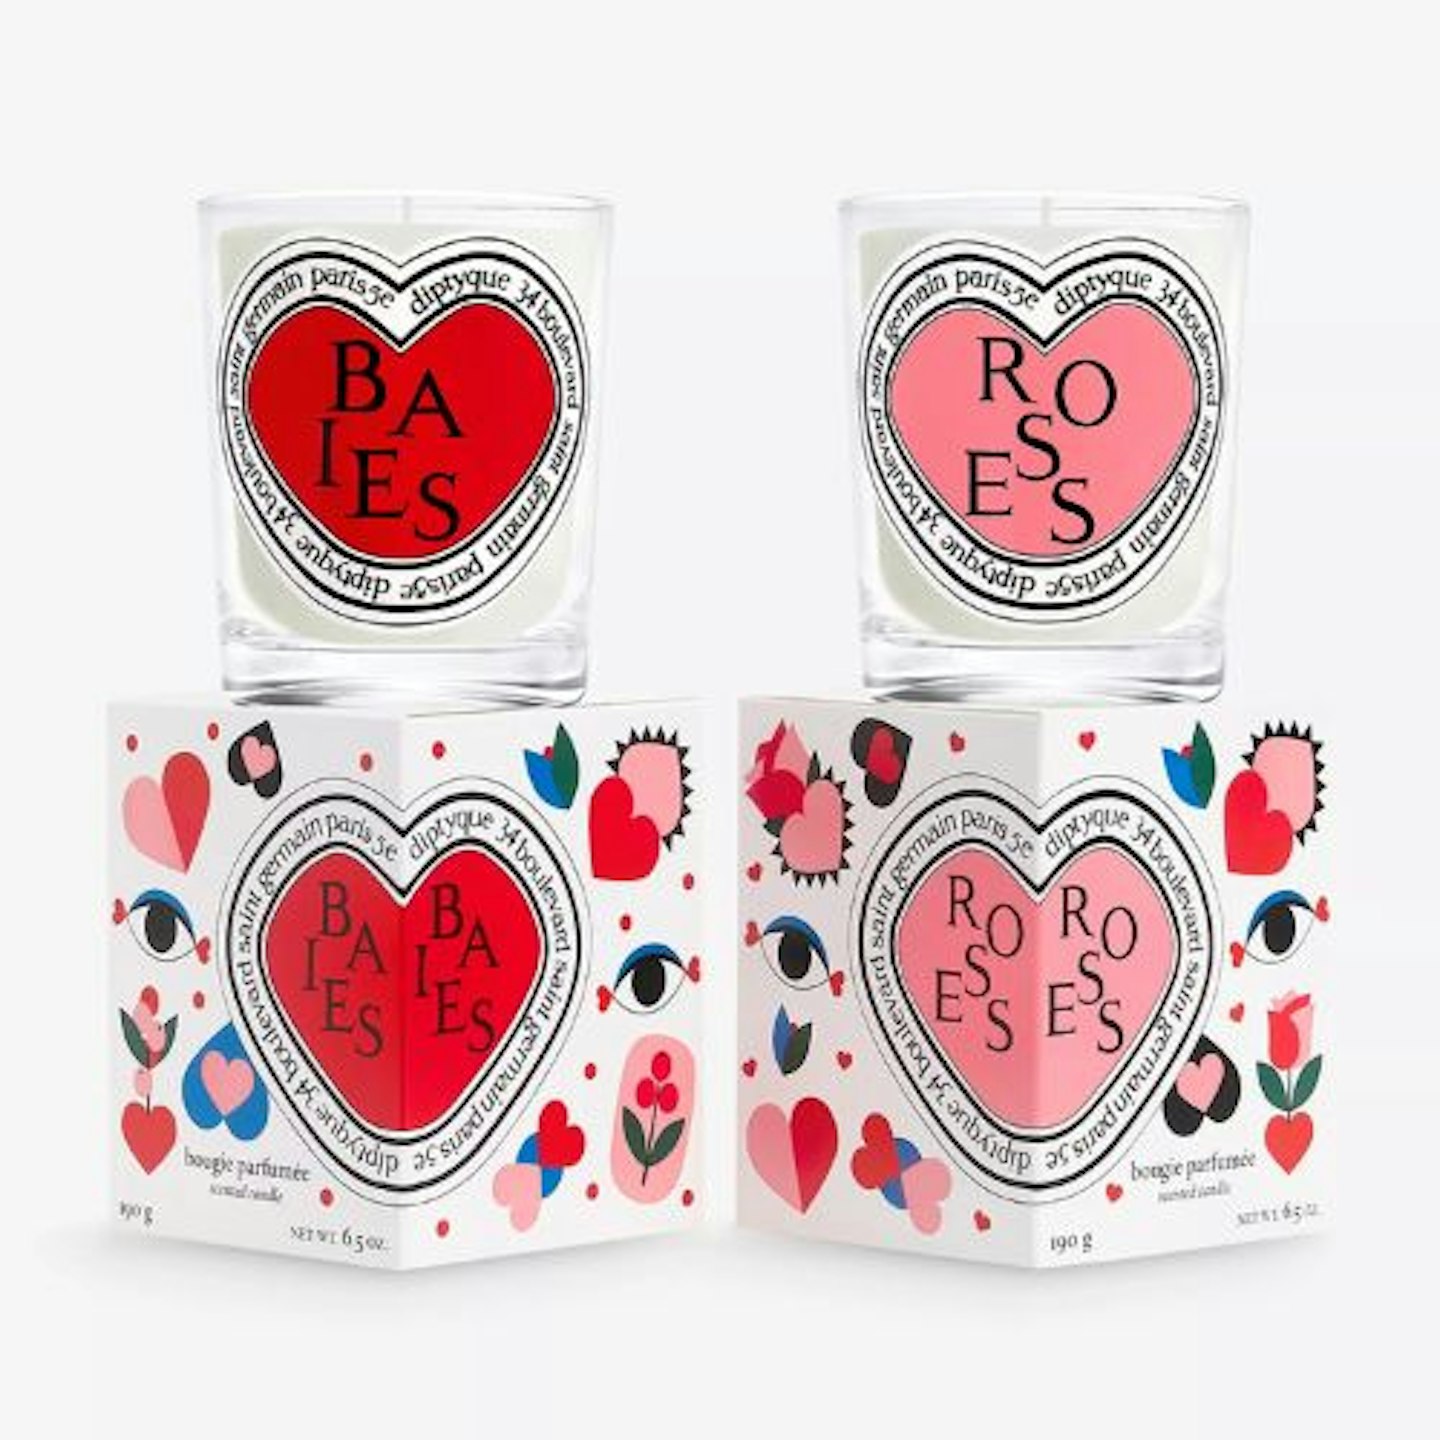 Diptyque 24 Le Valentines Baies and Roses Scented Candles